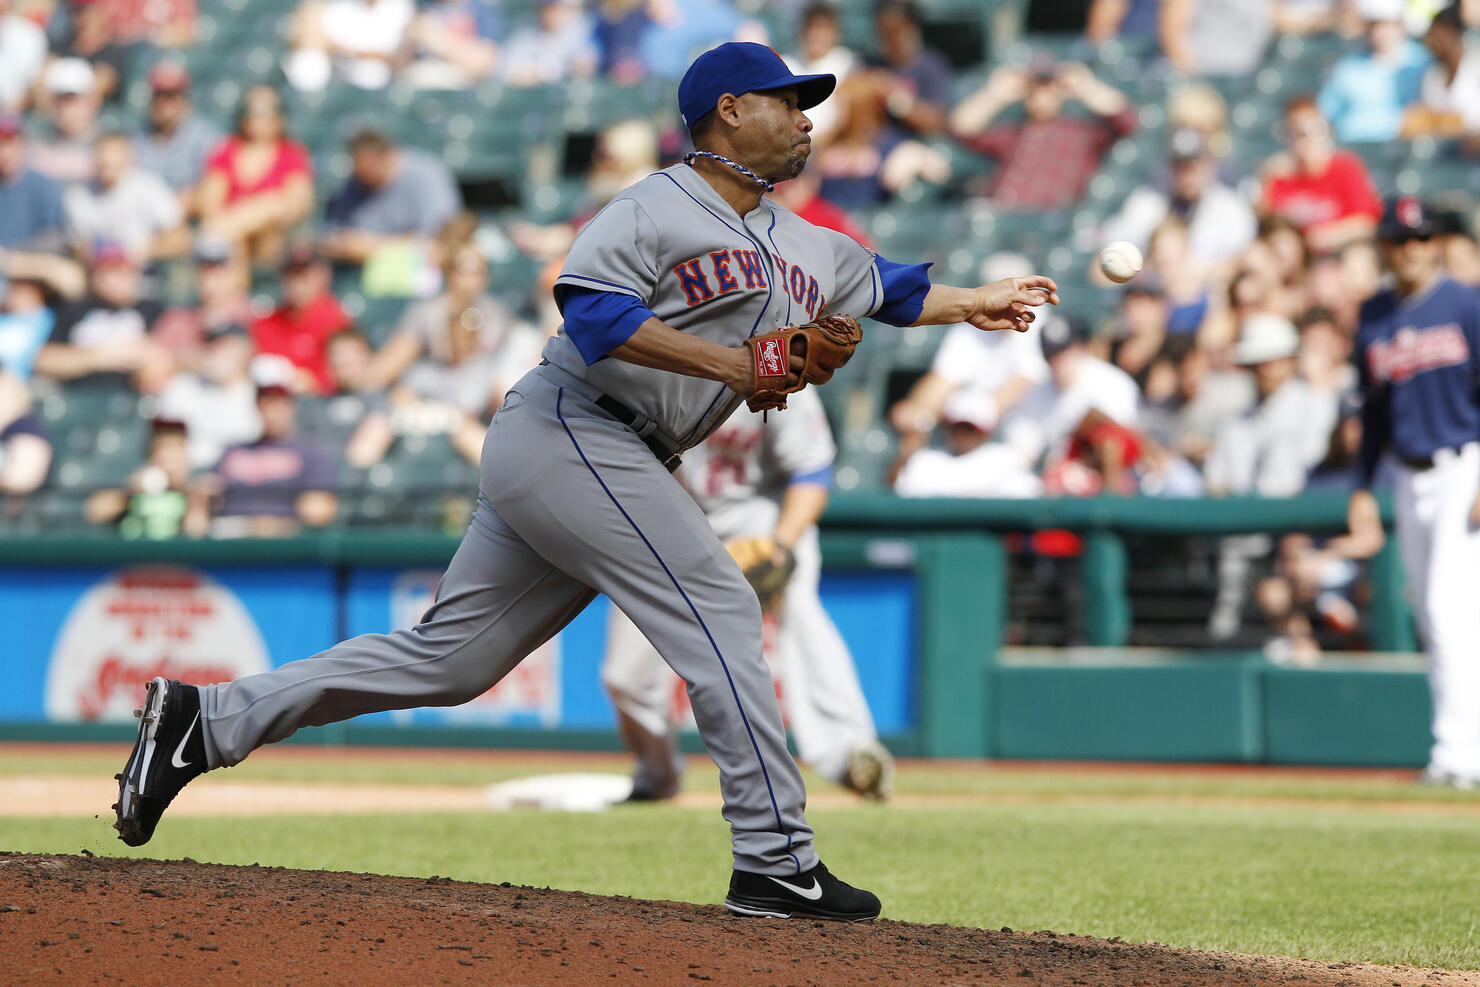 Pedro Feliciano, former NY Mets pitcher, dead at age 45